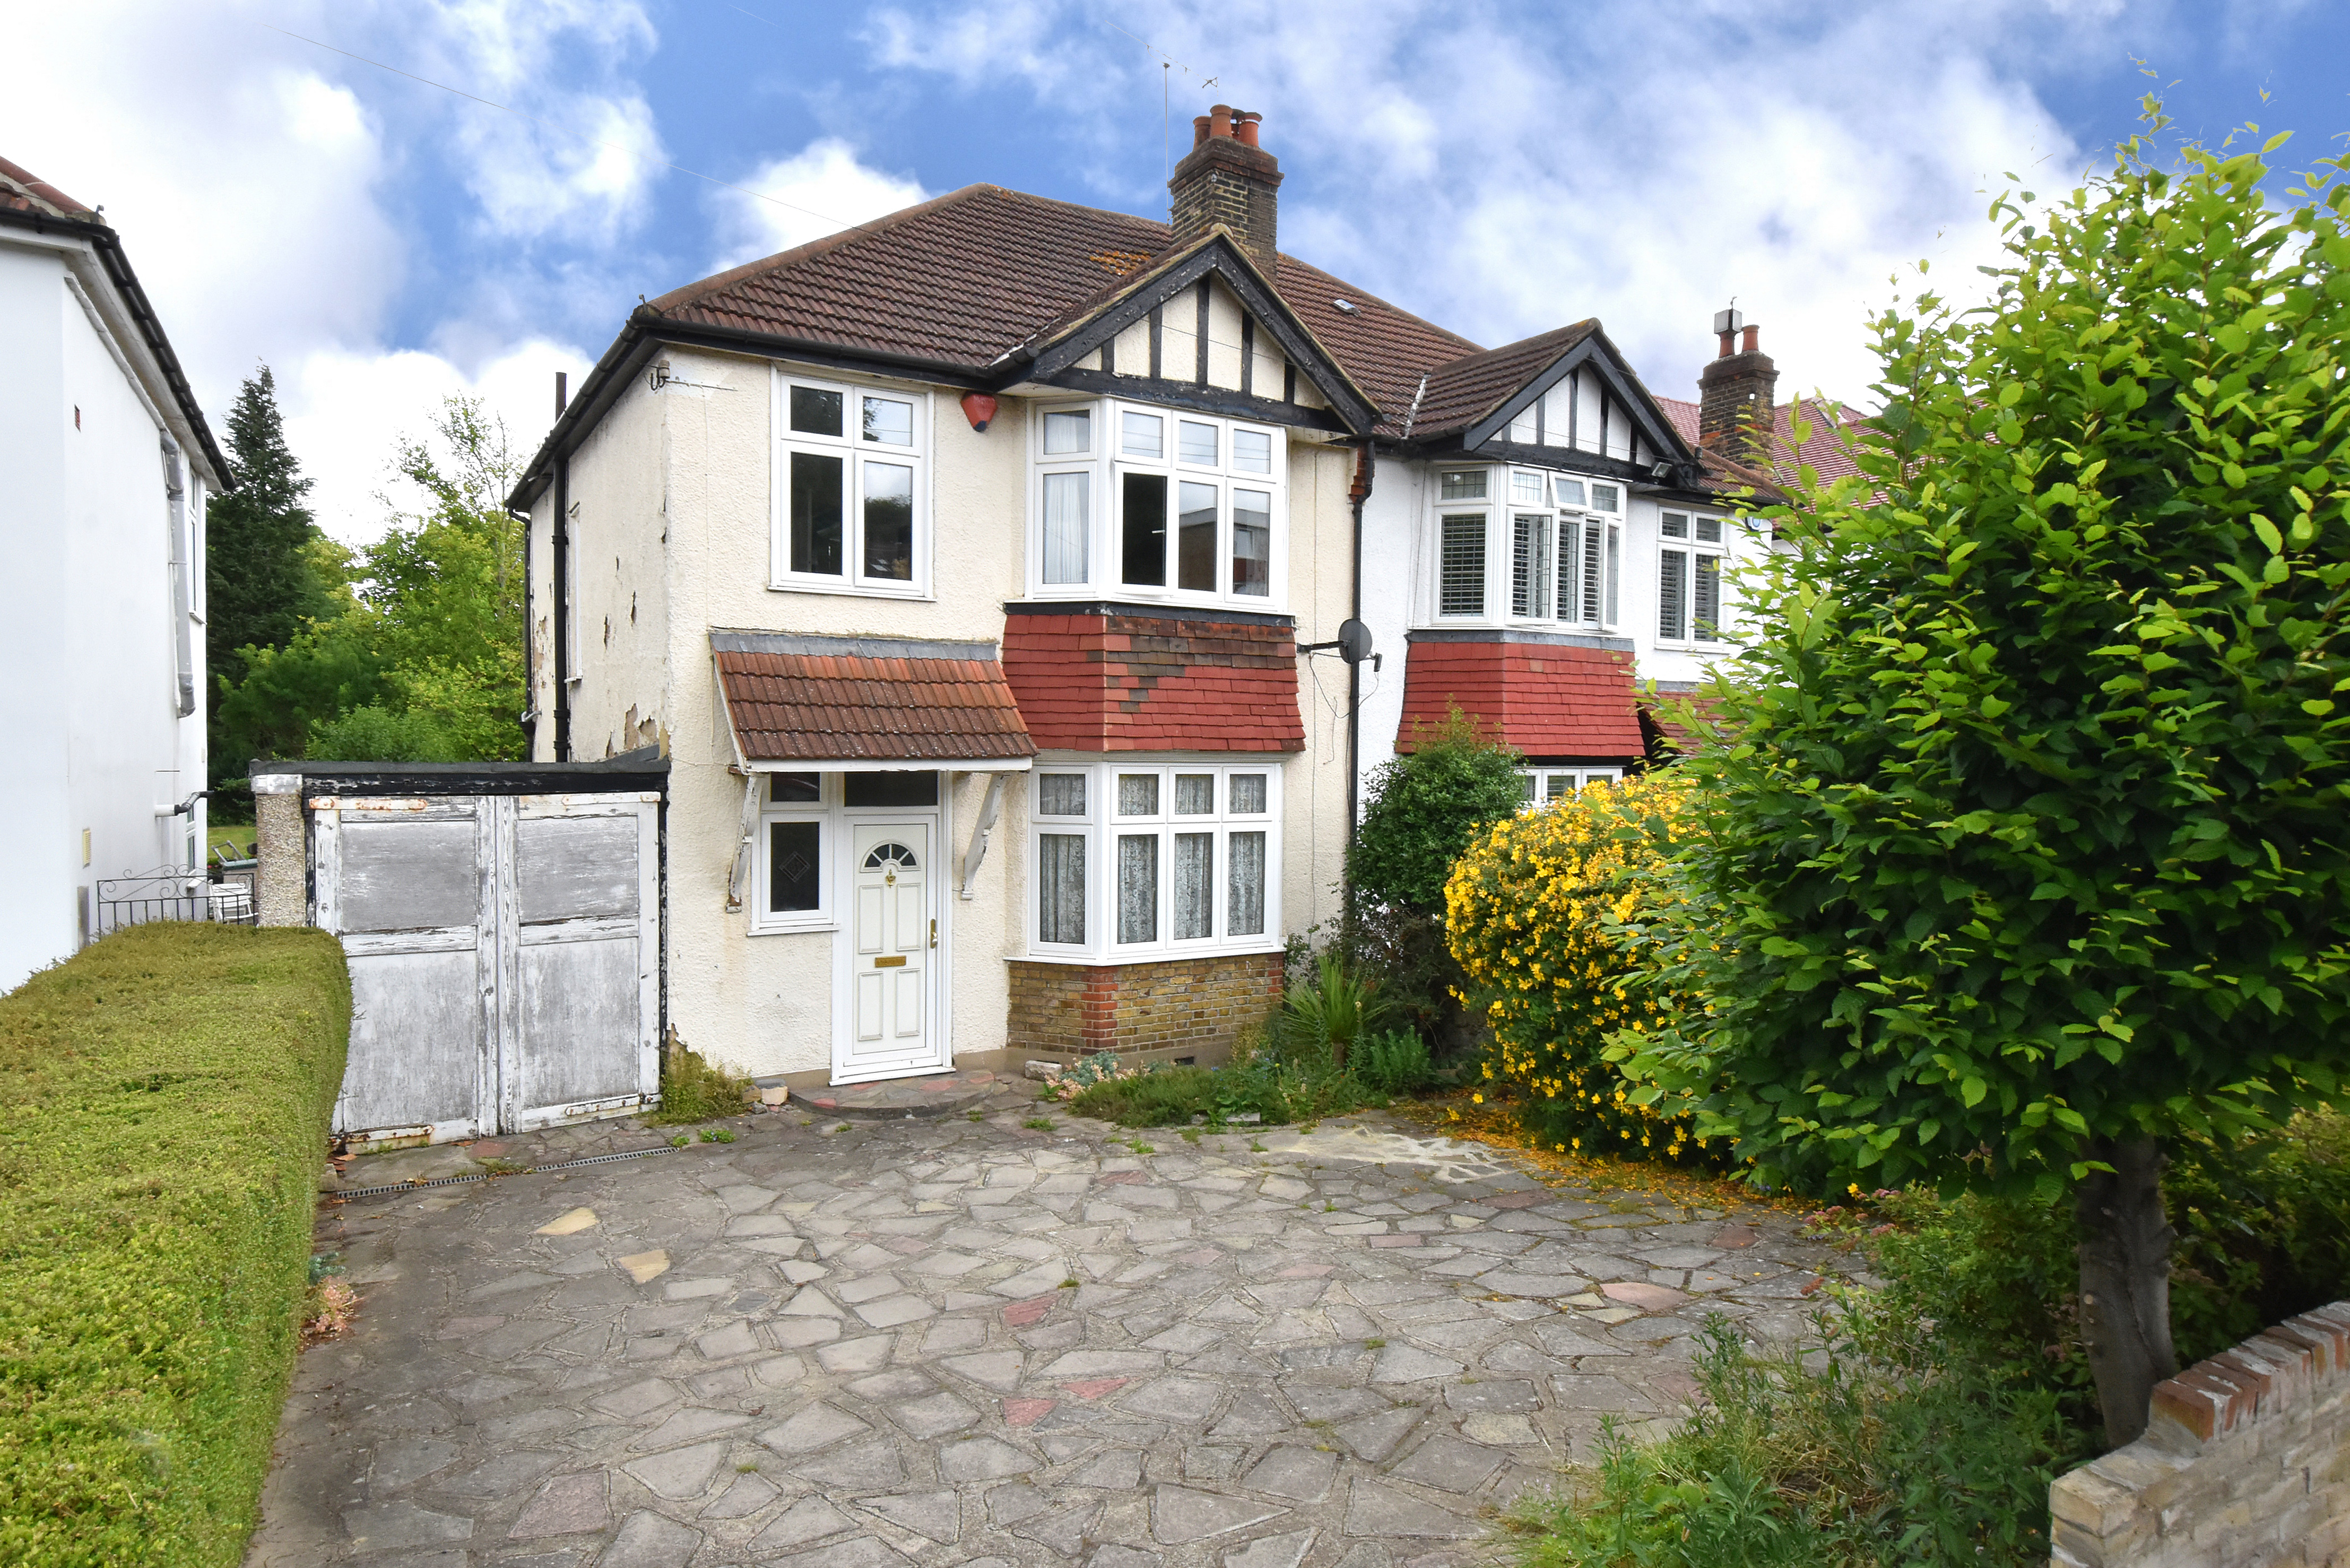 3 bed semi-detached house for sale in Valley Road, Bromley, BR2 